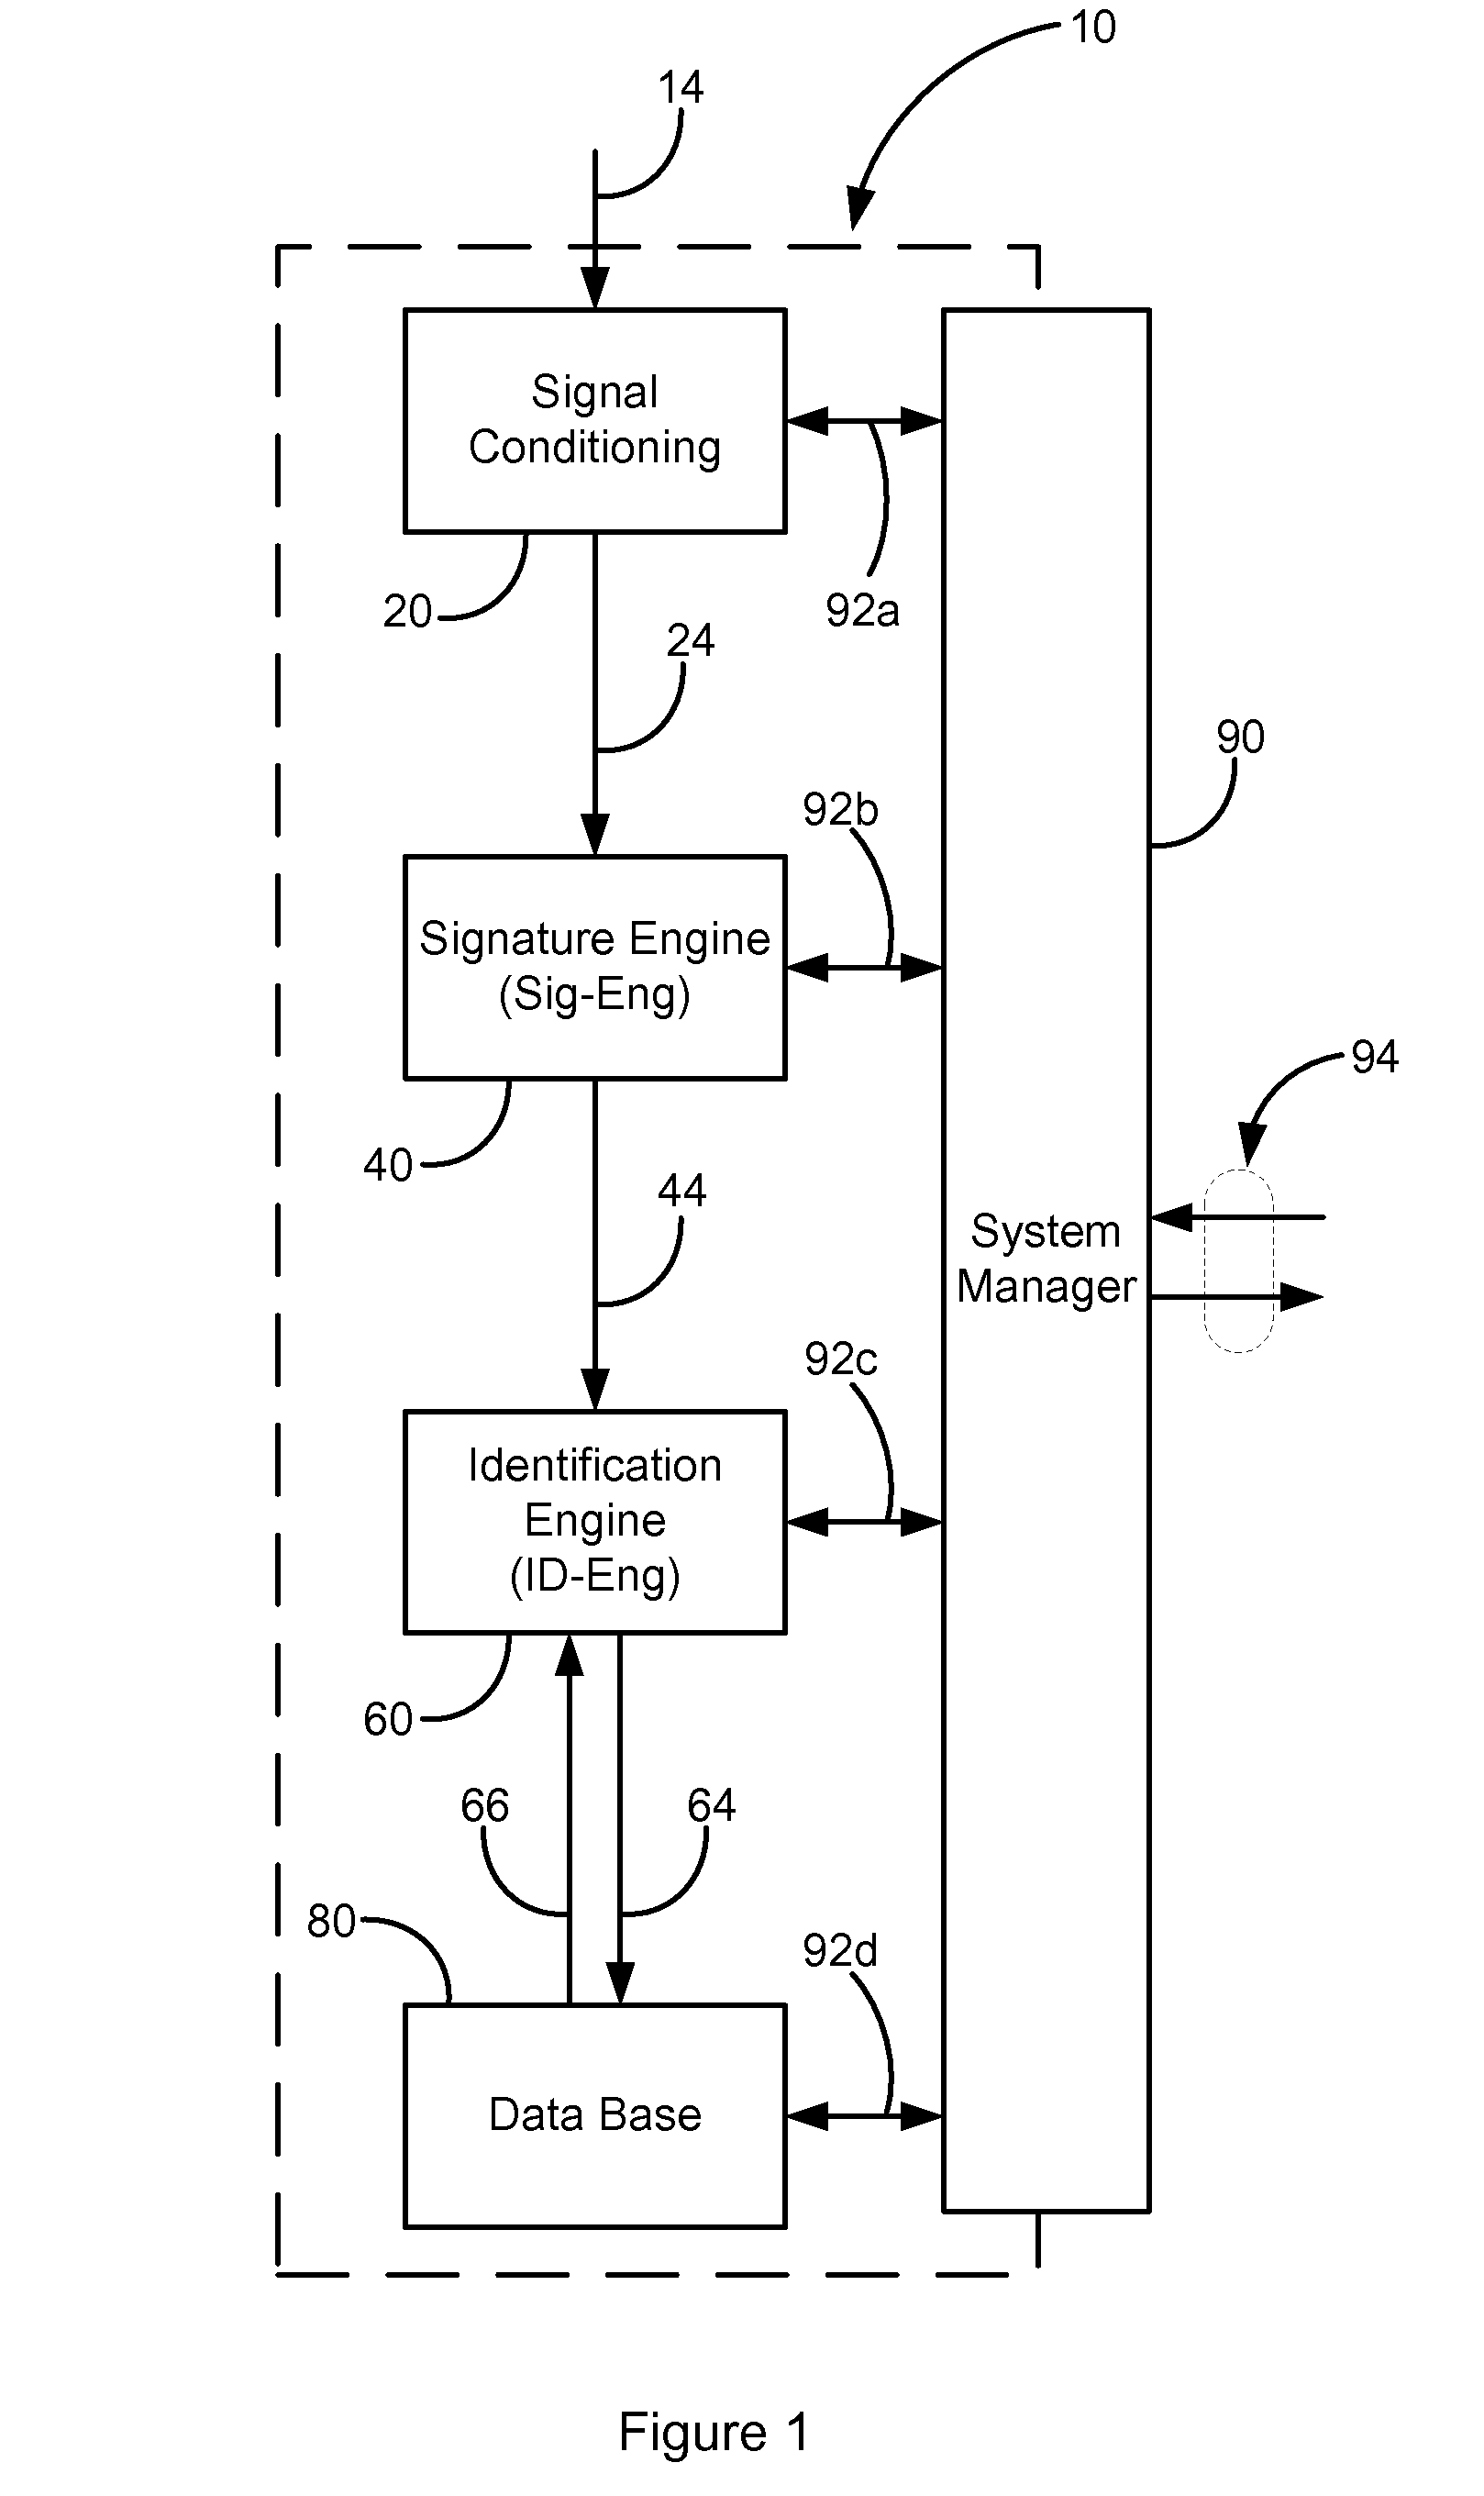 Apparatus Using Time-Based Electrical Characteristics to Identify an Electrical Appliance